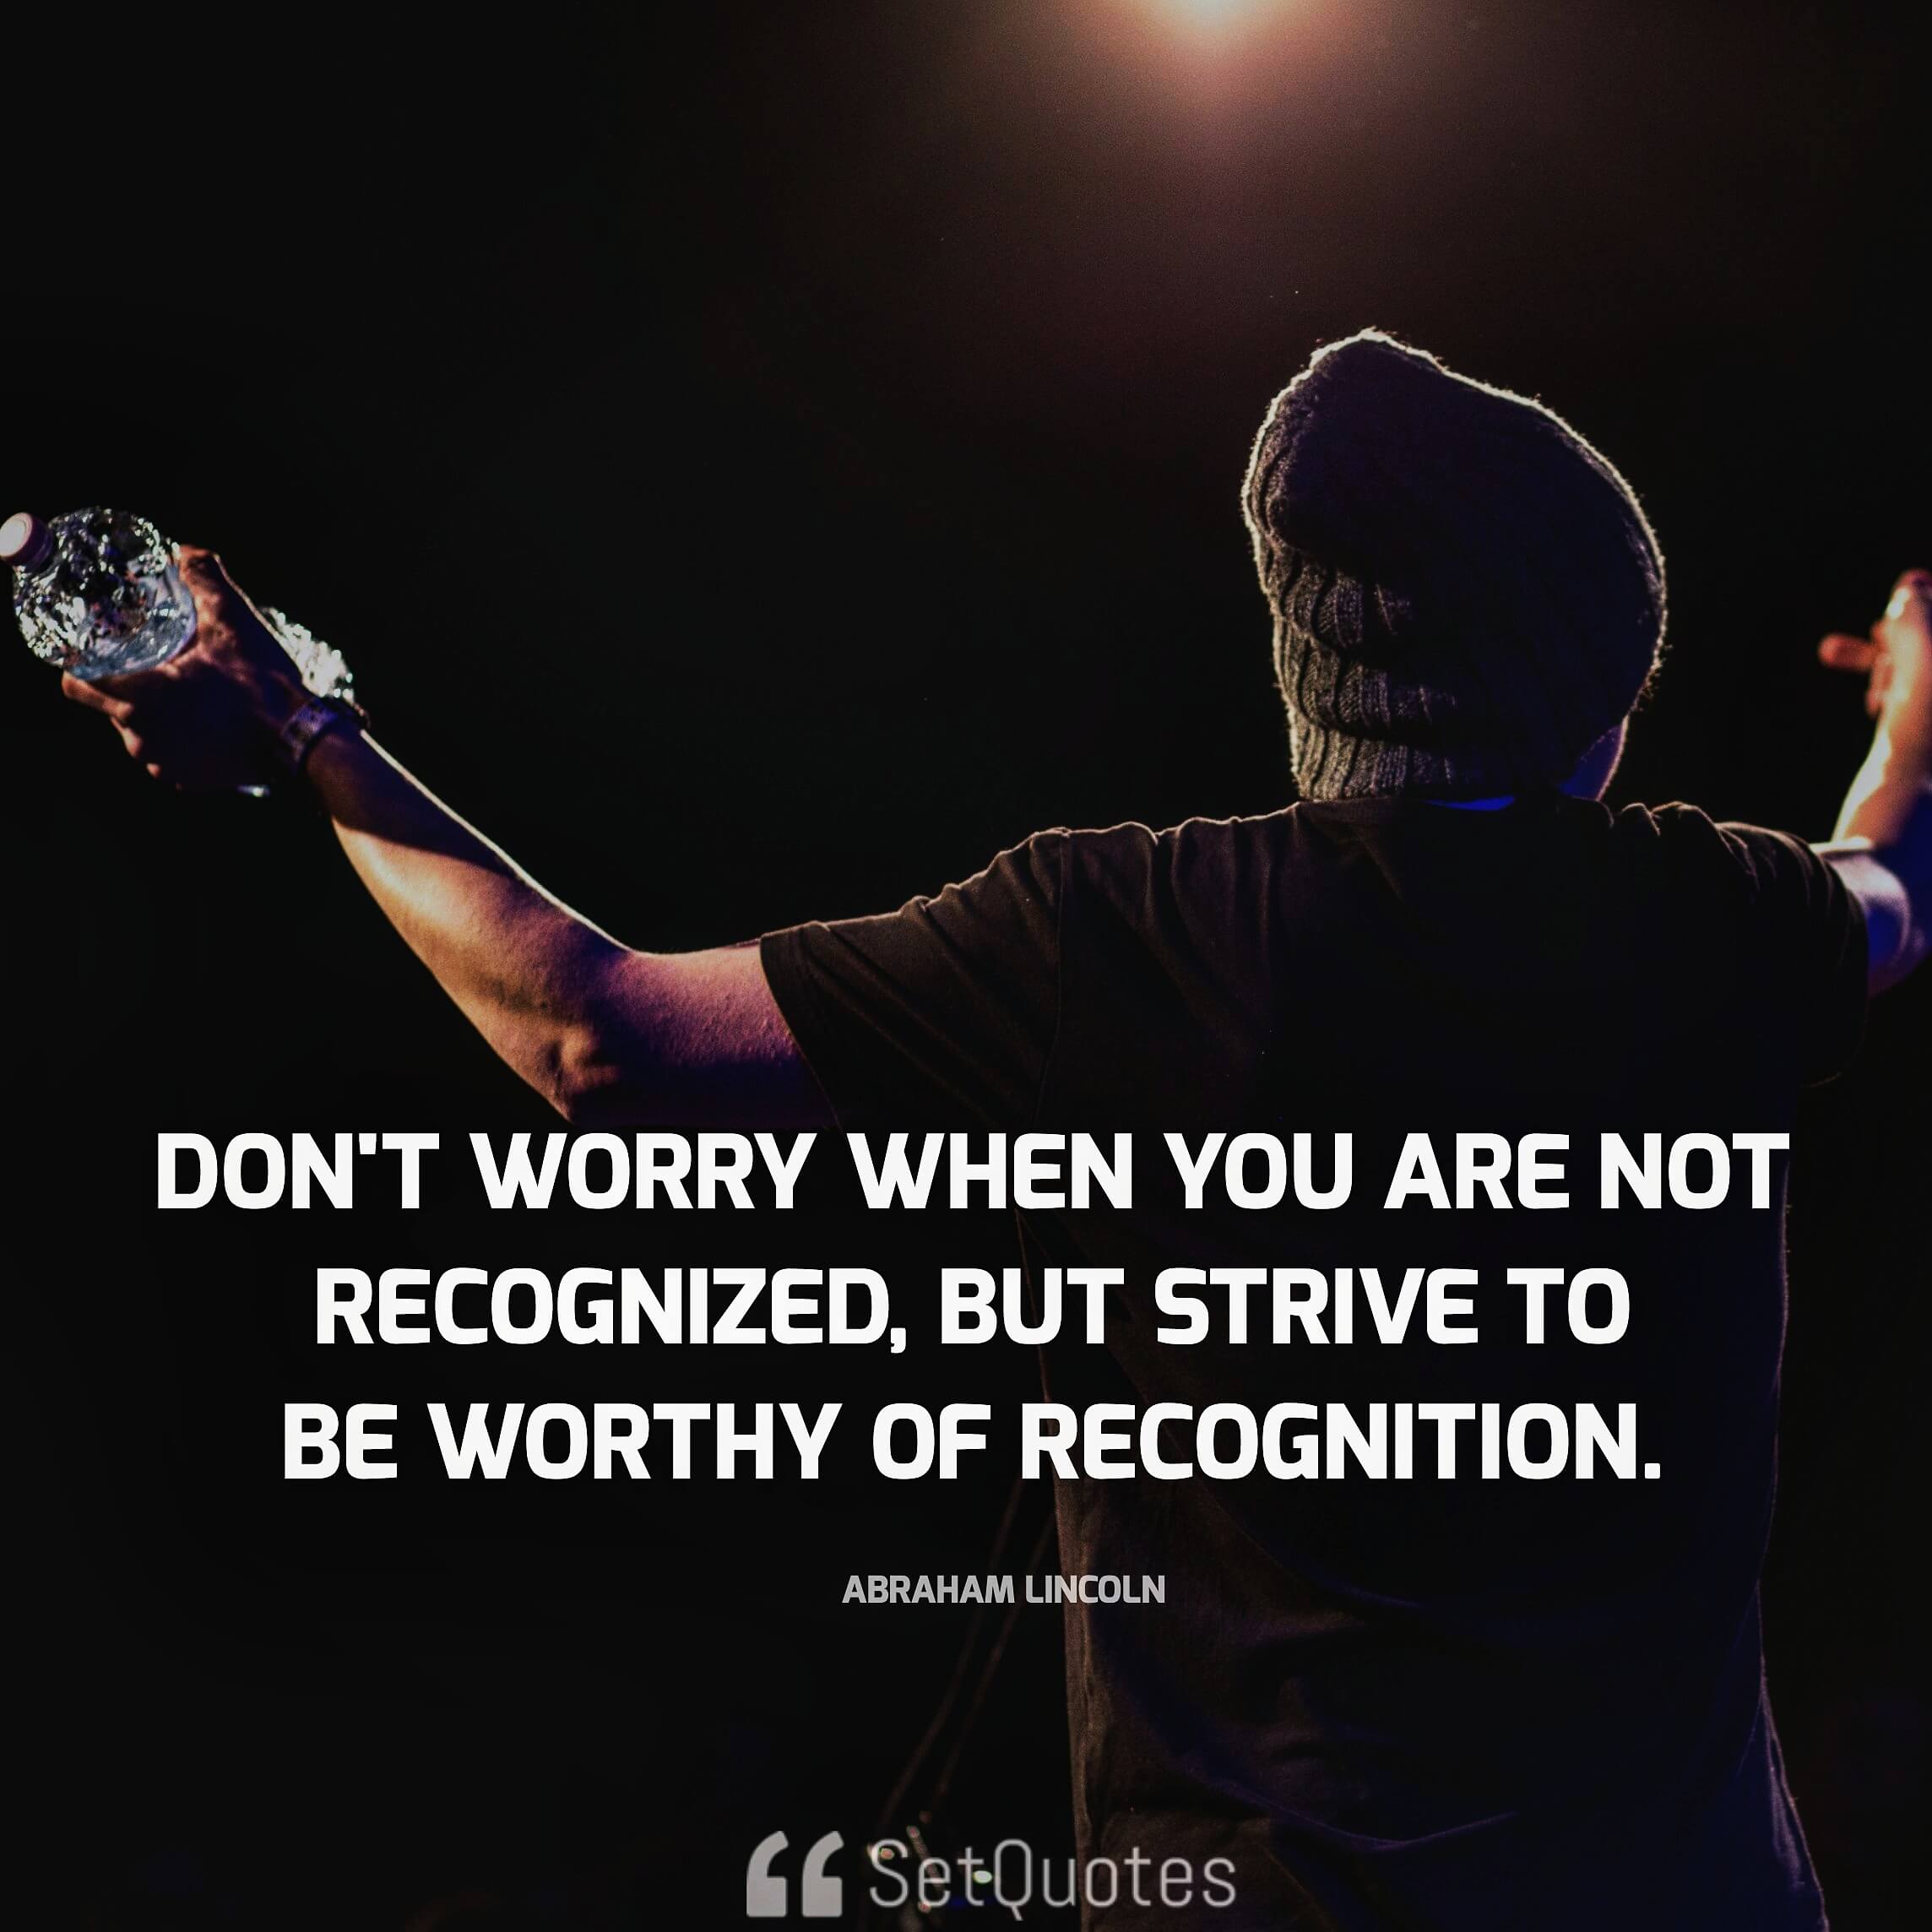 Don't worry when you are not recognized, but strive to be worthy of recognition. - Abraham Lincoln